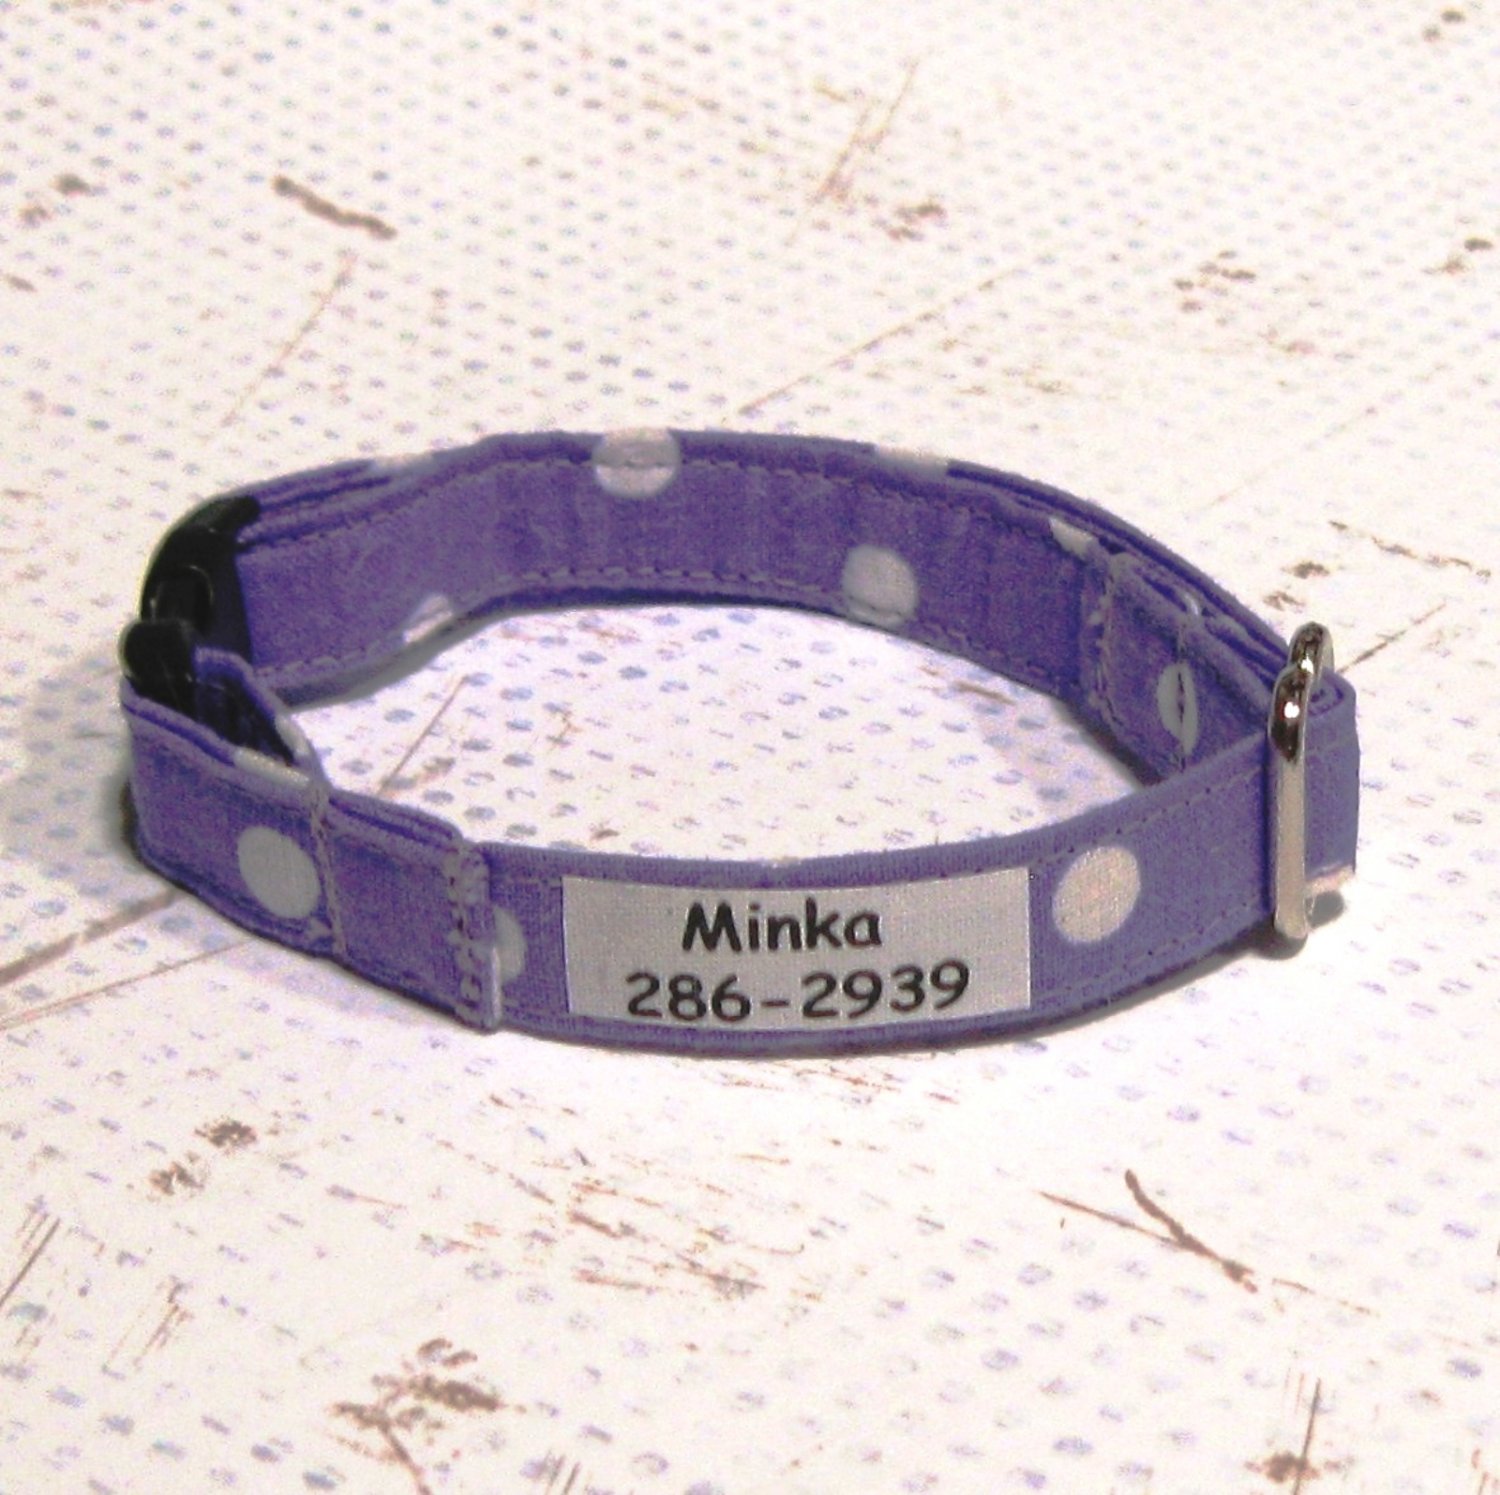 Tagless Pet ID Label for Cat Collars - Add On Purchase Only